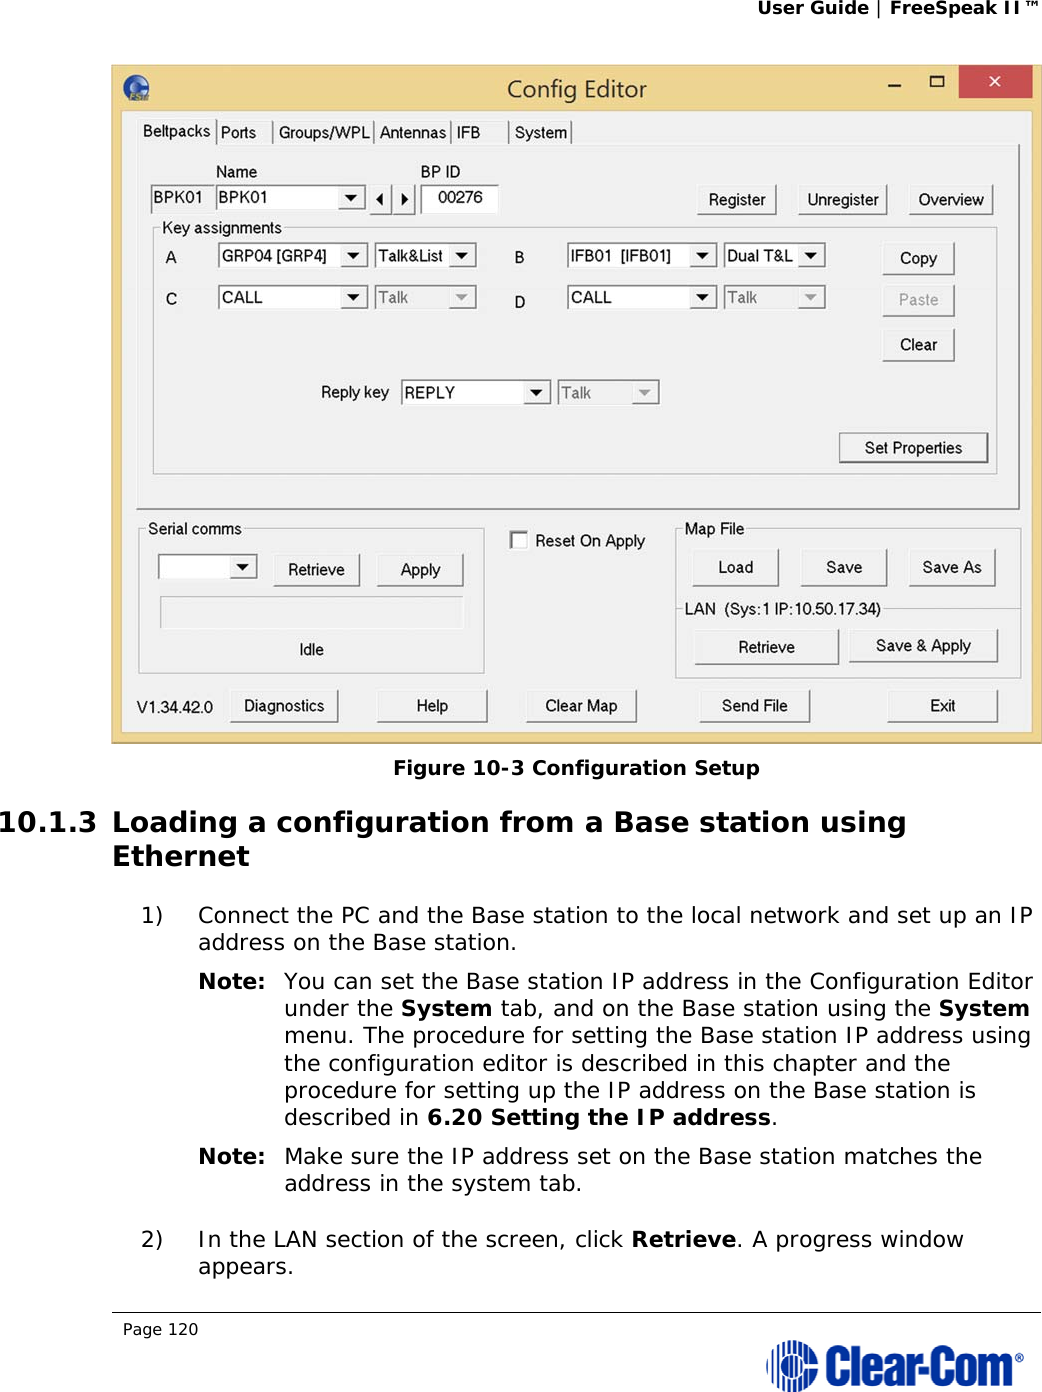 User Guide | FreeSpeak II™  Page 120   Figure 10-3 Configuration Setup 10.1.3 Loading a configuration from a Base station using Ethernet 1) Connect the PC and the Base station to the local network and set up an IP address on the Base station. Note: You can set the Base station IP address in the Configuration Editor under the System tab, and on the Base station using the System menu. The procedure for setting the Base station IP address using the configuration editor is described in this chapter and the procedure for setting up the IP address on the Base station is described in 6.20 Setting the IP address. Note: Make sure the IP address set on the Base station matches the address in the system tab. 2) In the LAN section of the screen, click Retrieve. A progress window appears. 